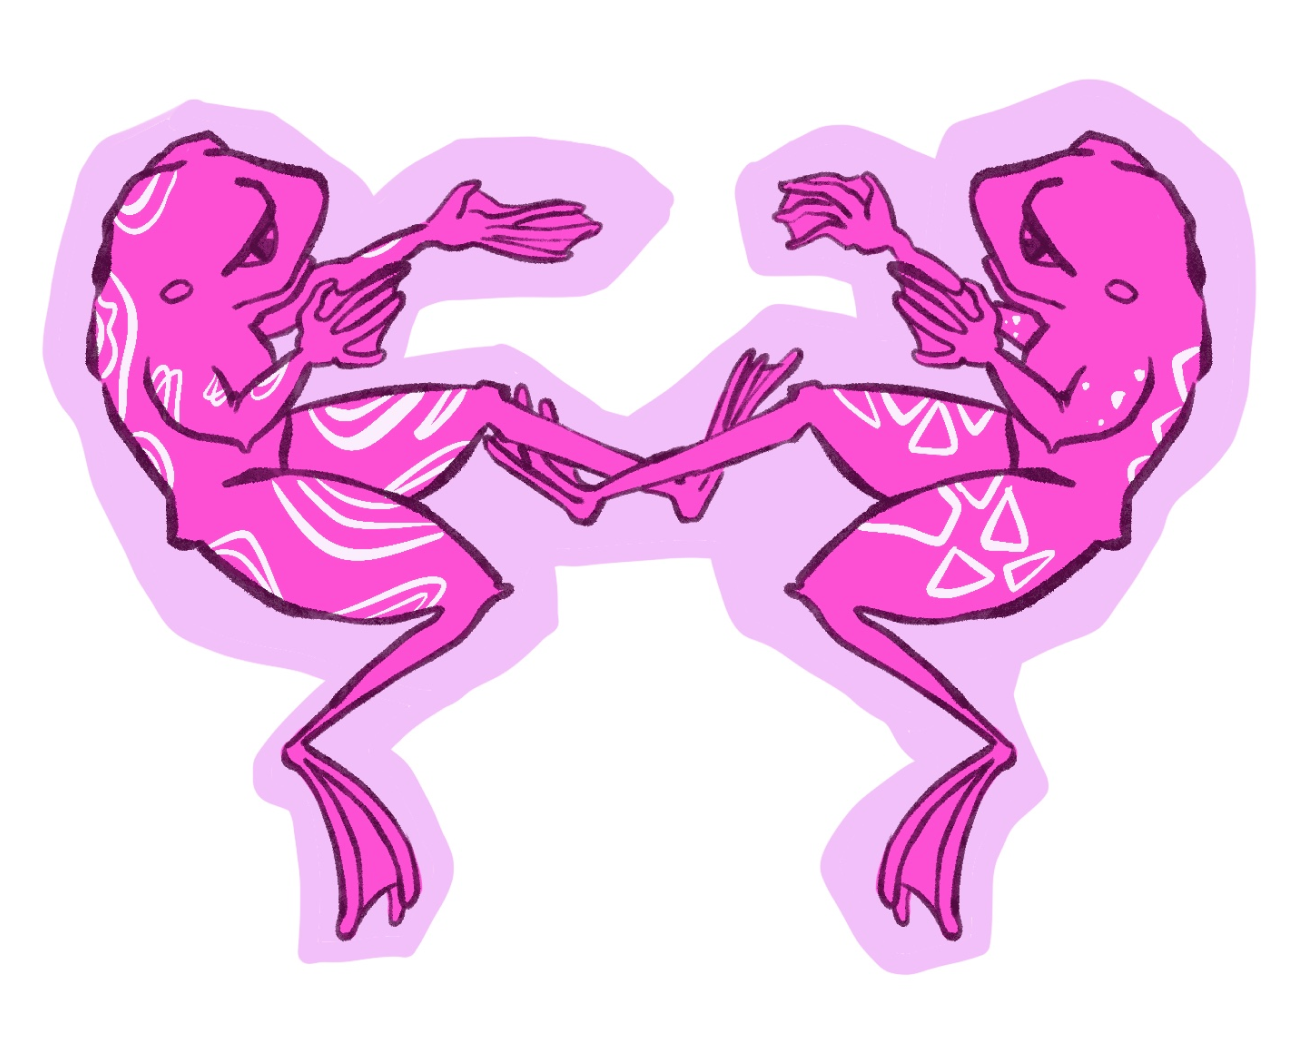 two bright pink frogs mirrored from one another reaching out